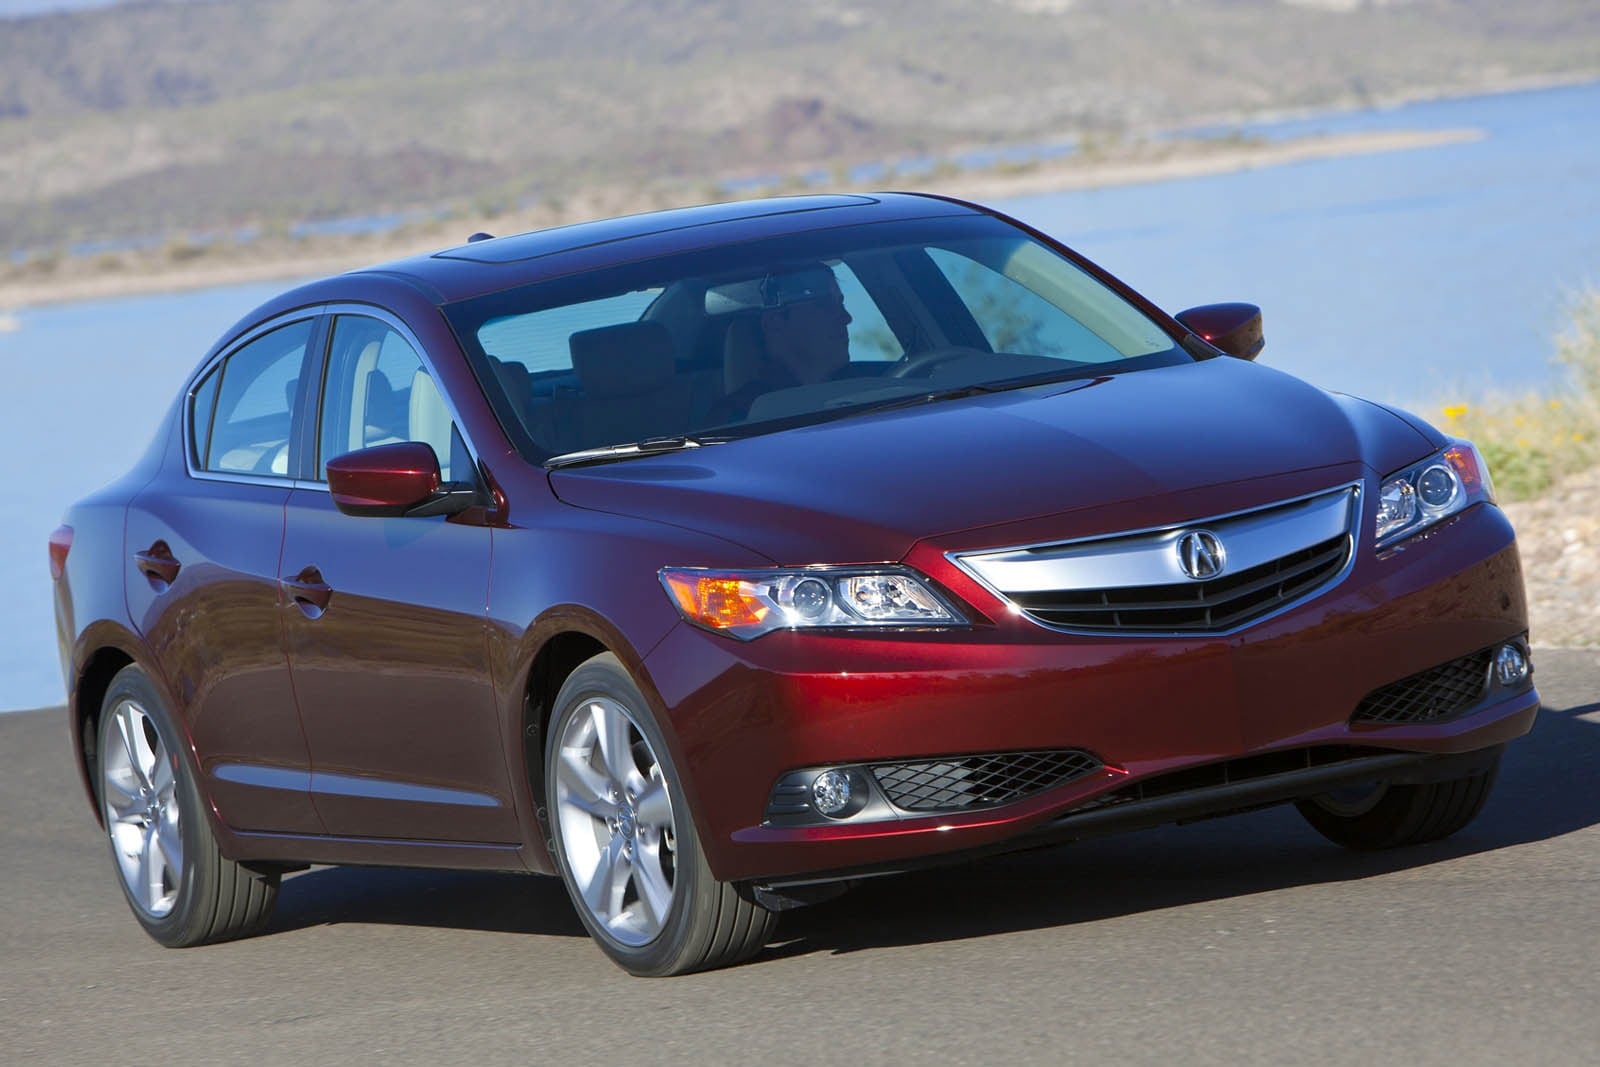 2015 Acura ILX Review & Ratings | Edmunds